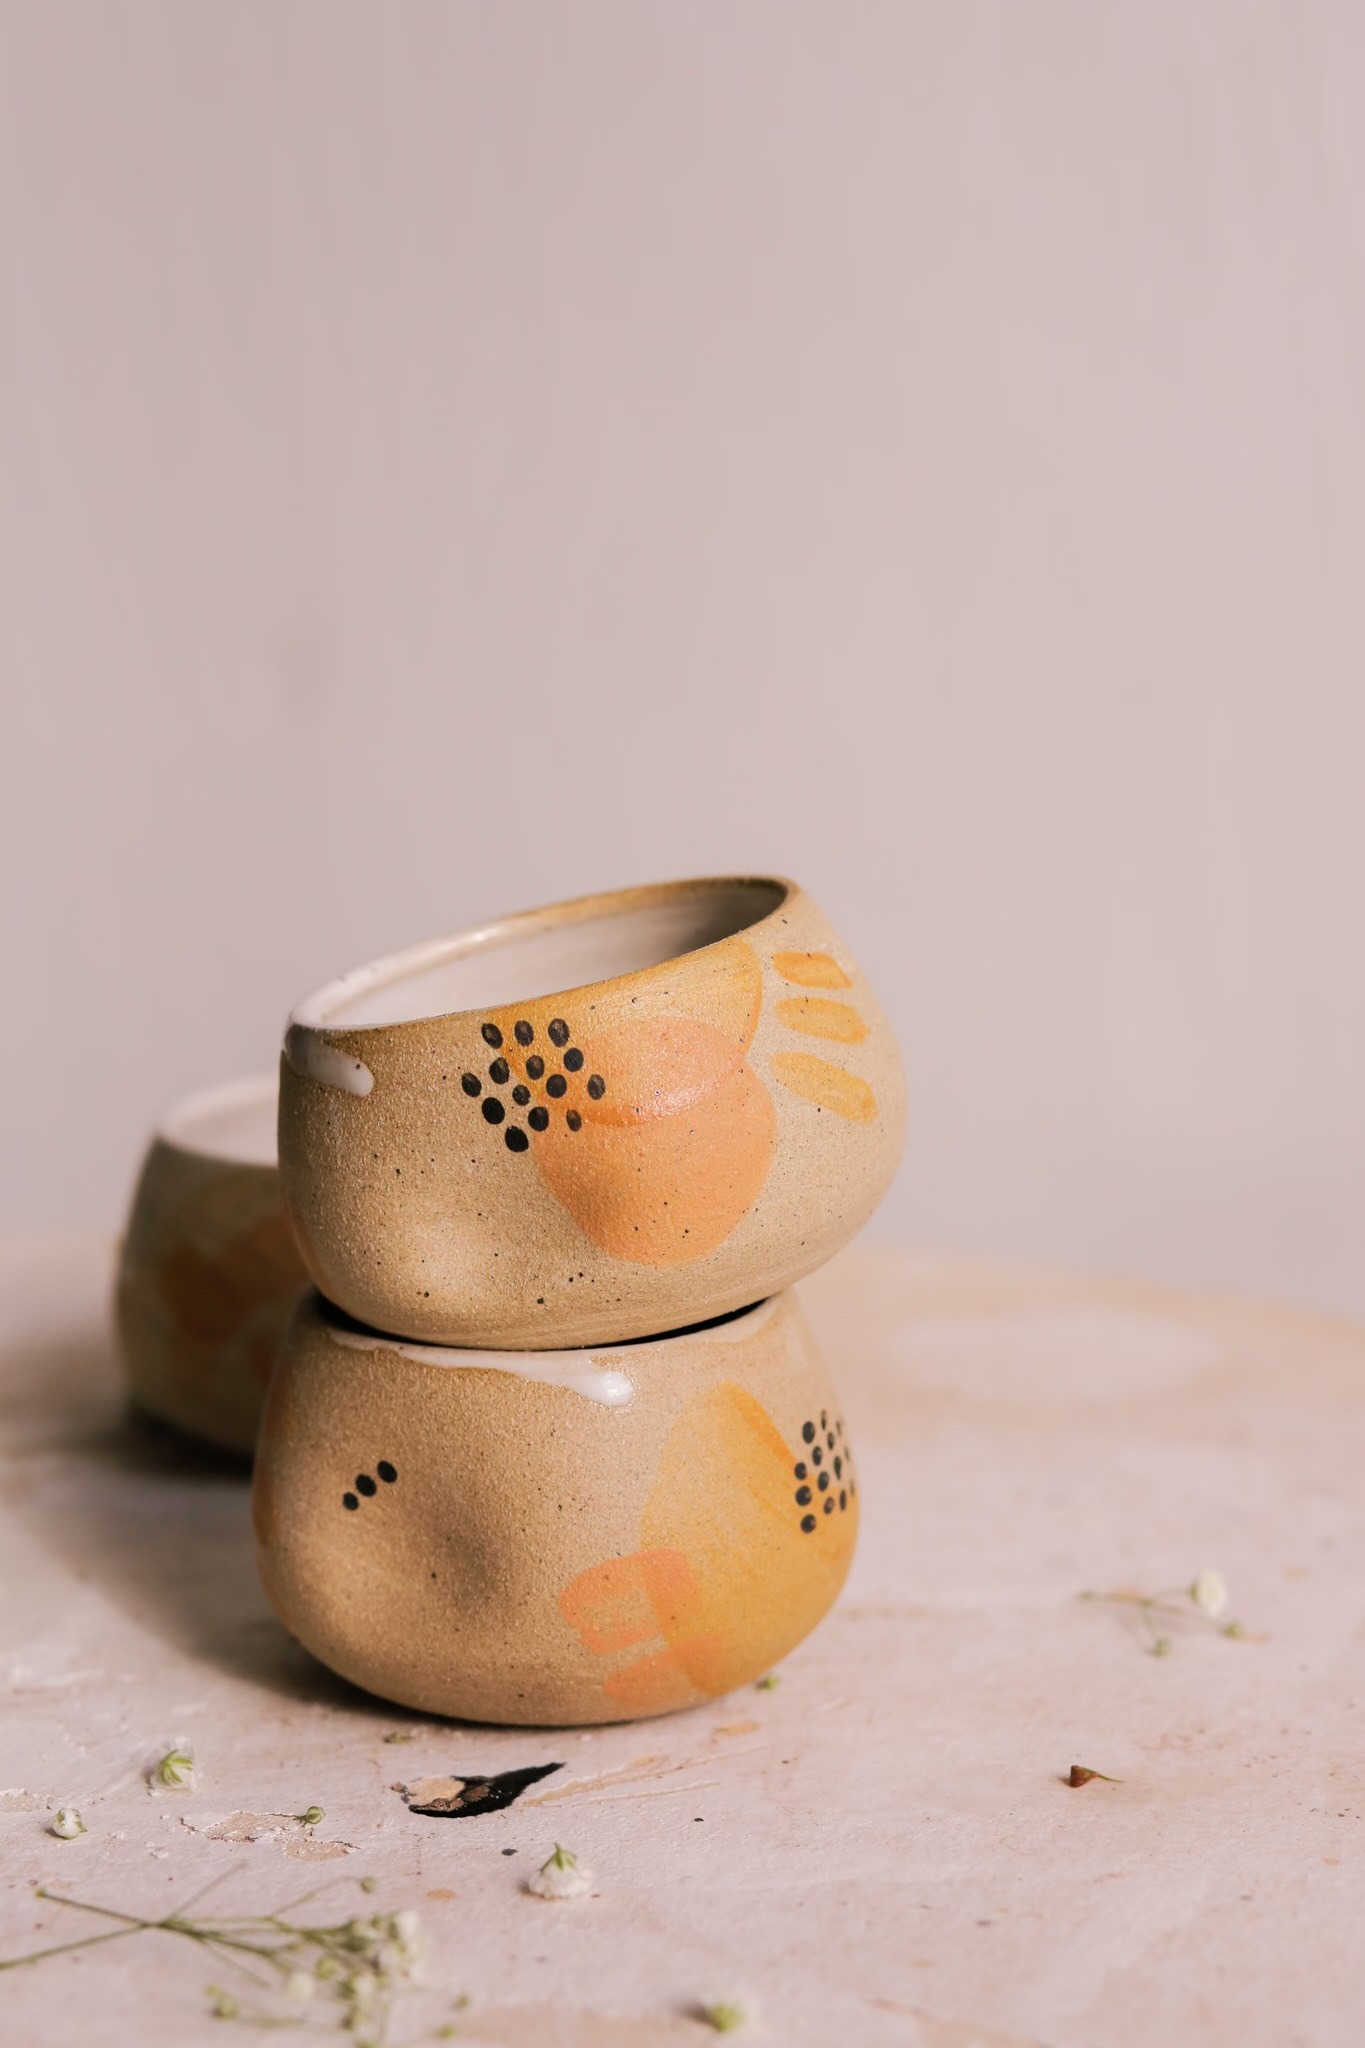 Two small mugs stacked on top of one another, a third one is situated behind the two. The mugs are on a textured surface and in front of a dark cream colored backdrop. The mugs are neutral colors with black and orange abstract shapes on them. 